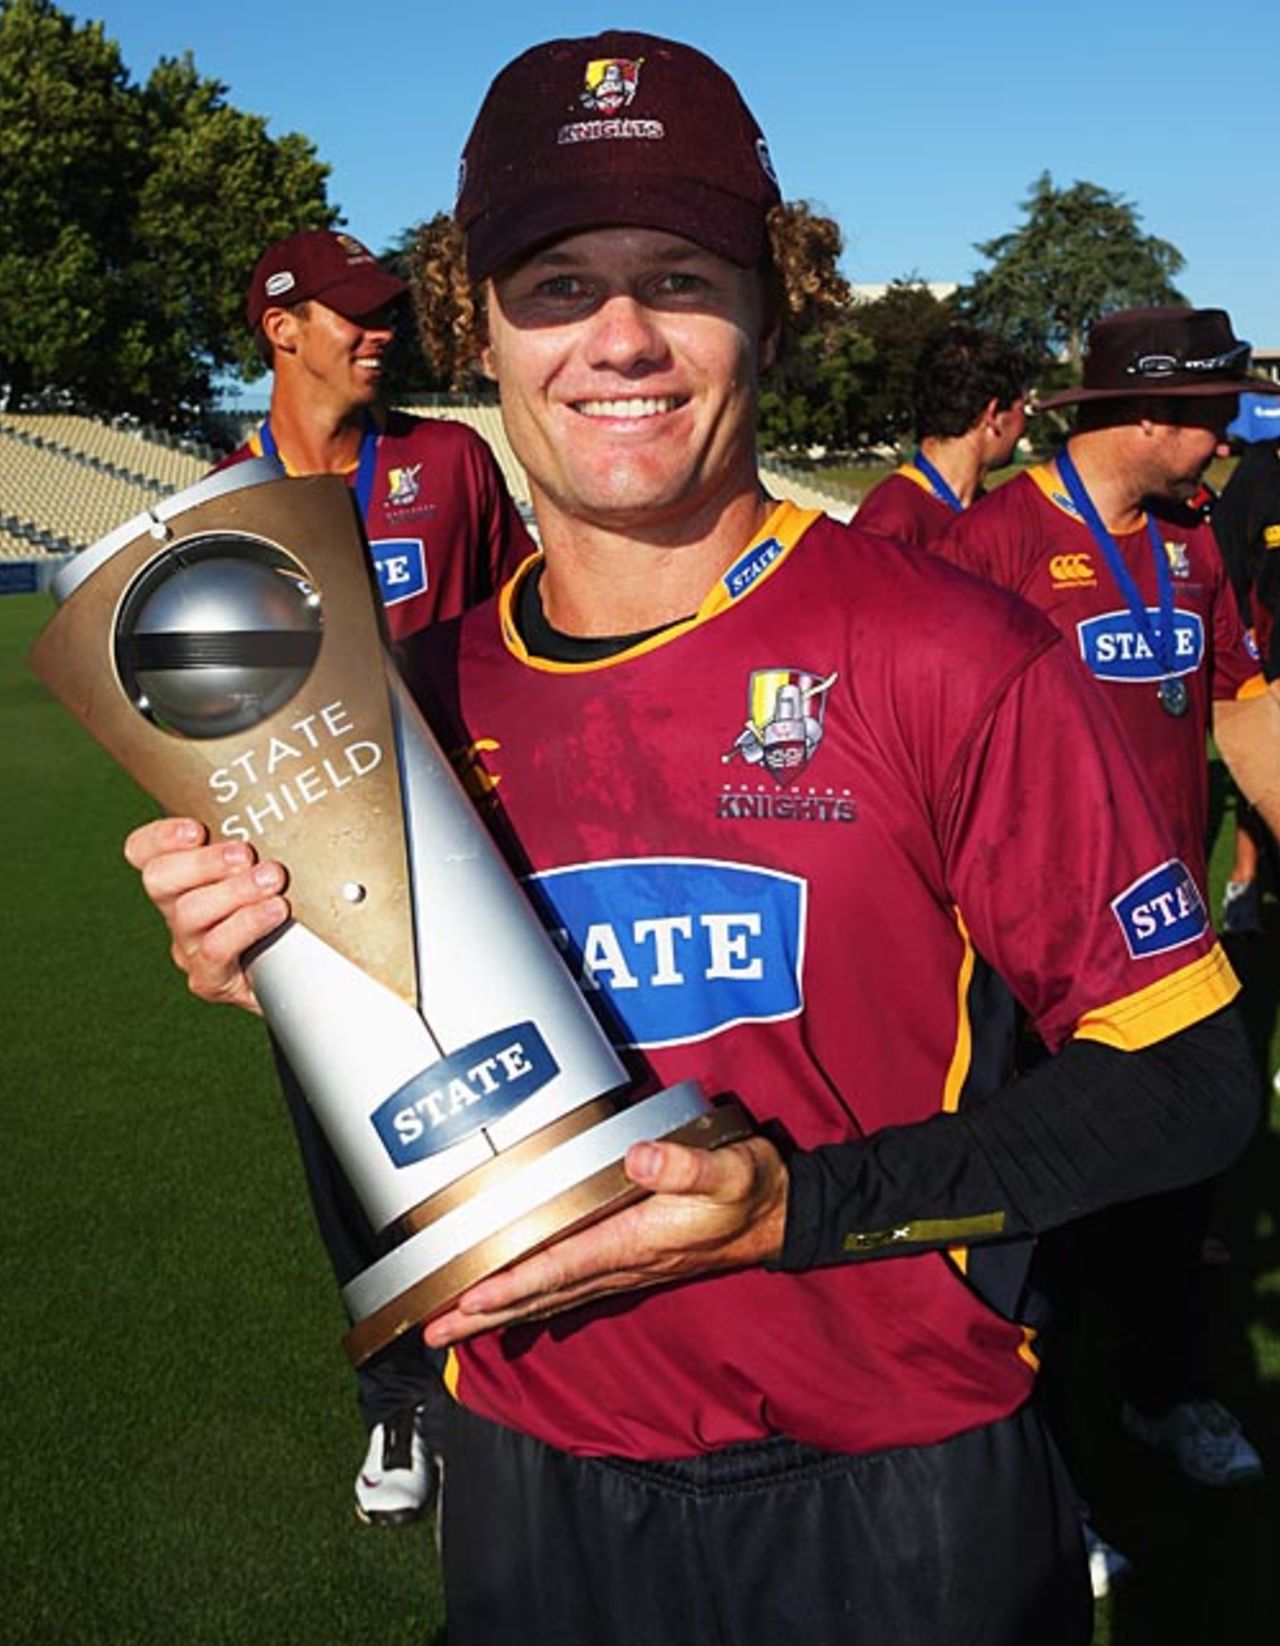 James Marshall with the trophy, Northern Districts v Otago, State Shield final, Hamilton, January 31, 2009